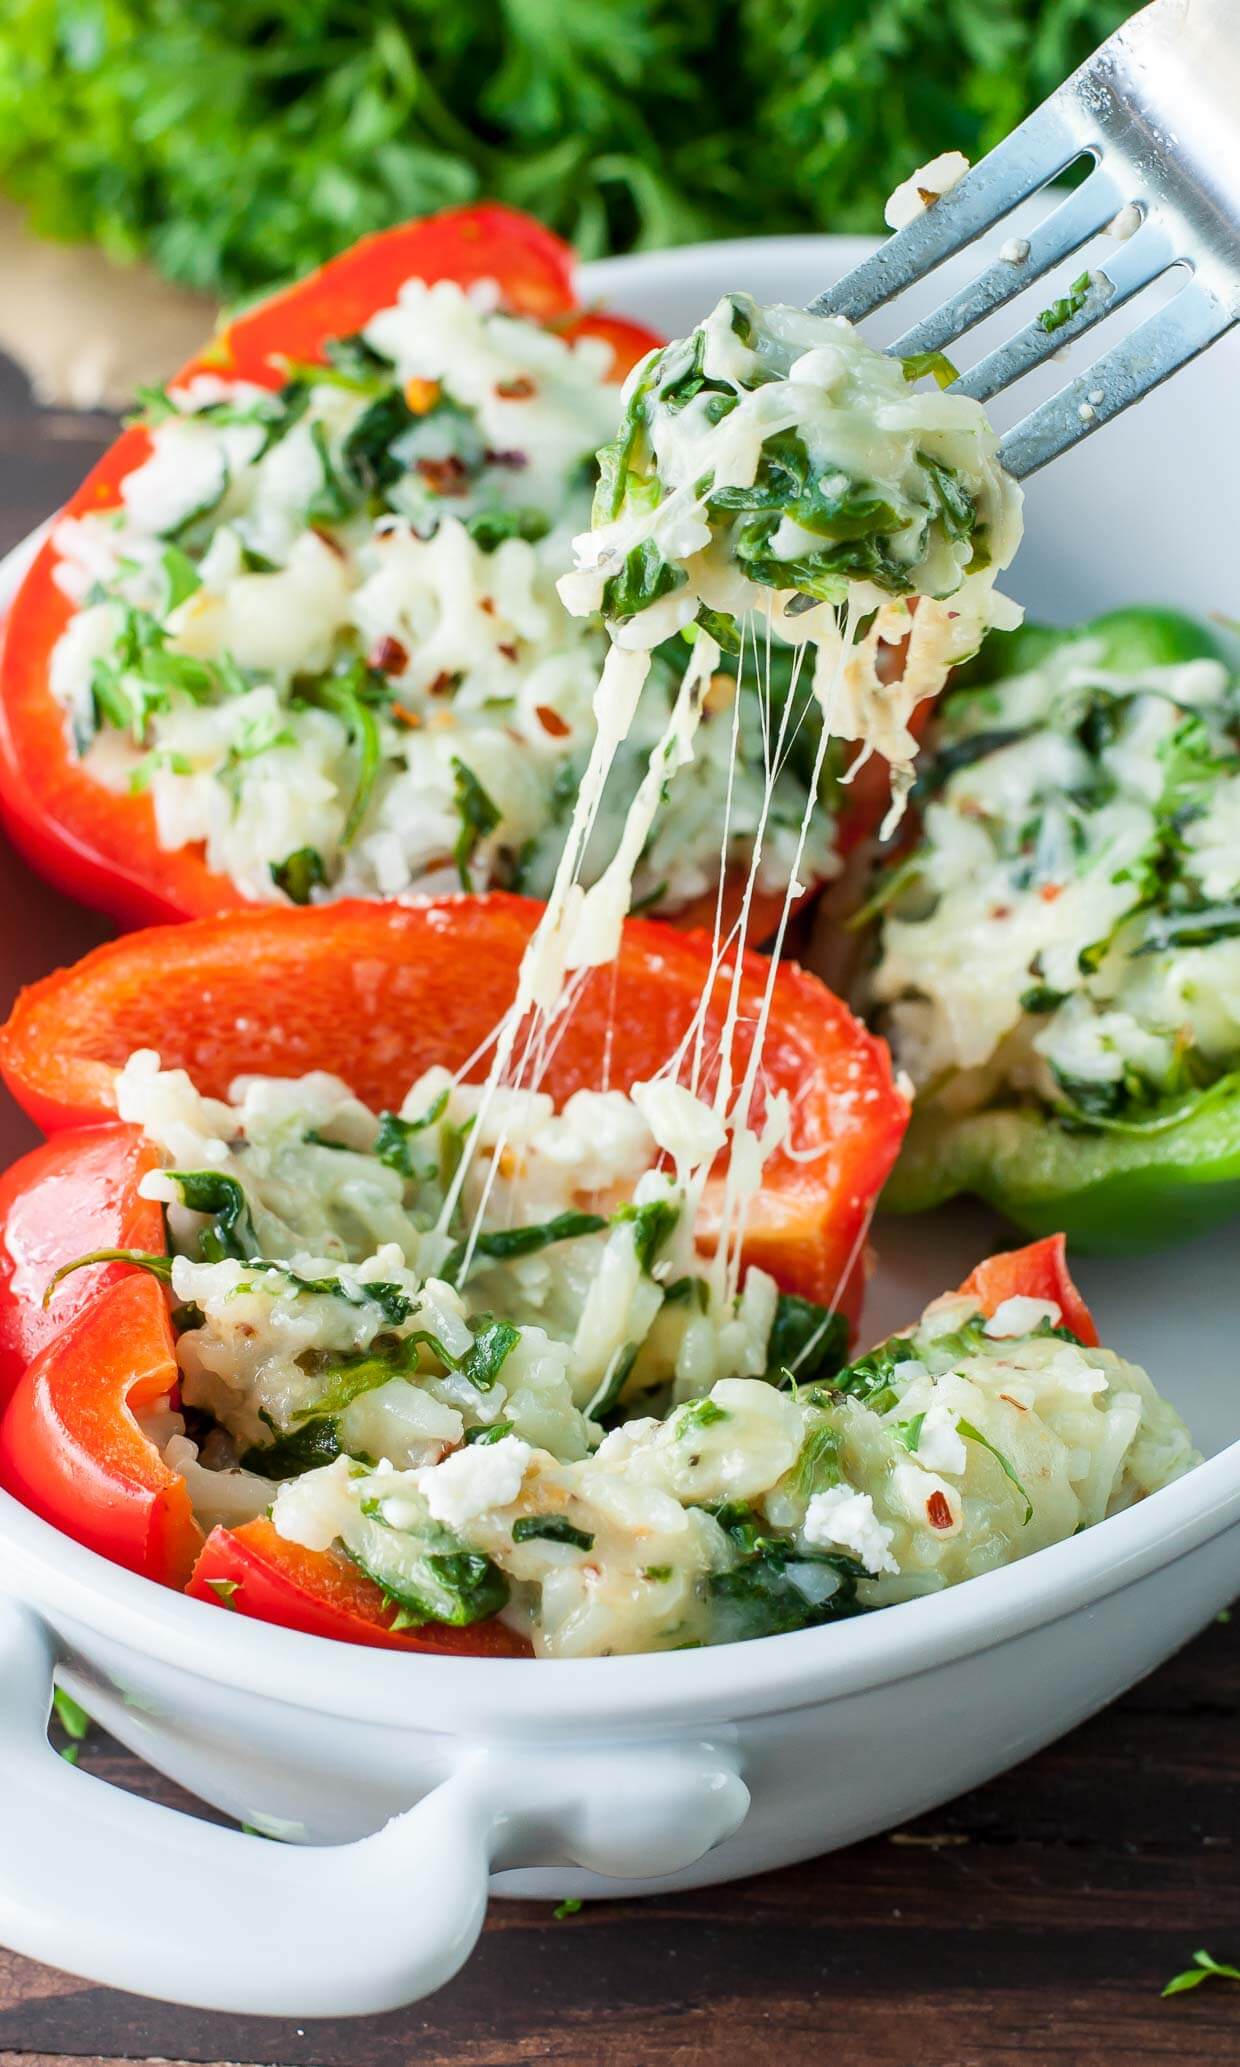 Cheesy Spinach Stuffed Peppers from Peas & Crayons